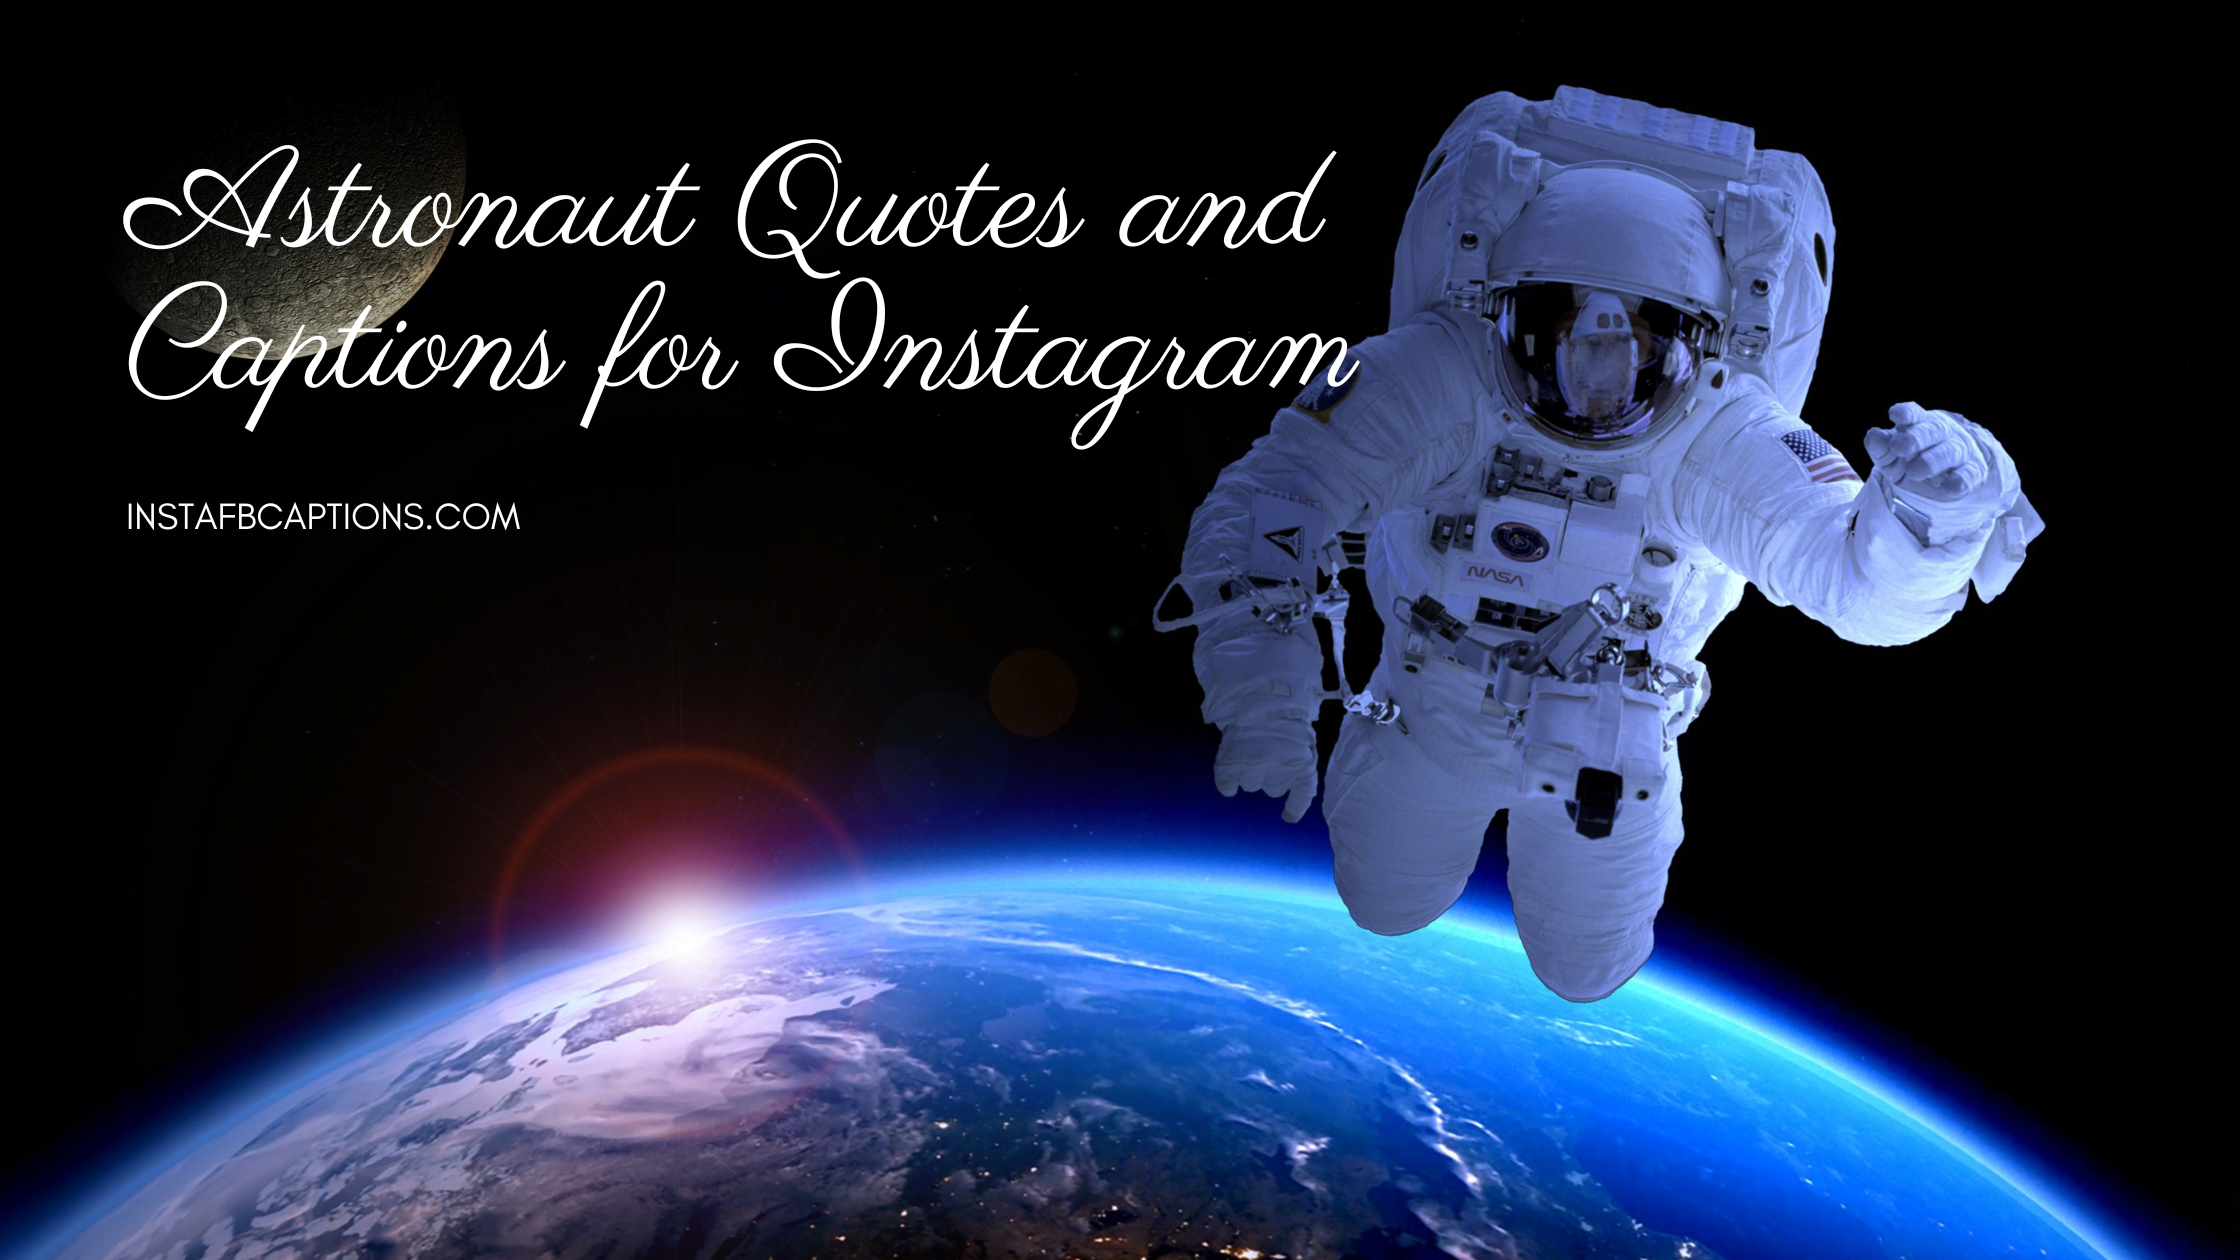 Astronaut Quotes And Captions For Instagram  - Astronaut Quotes and Captions for Instagram - [New] Astronaut Captions Quotes for Instagram in 2023